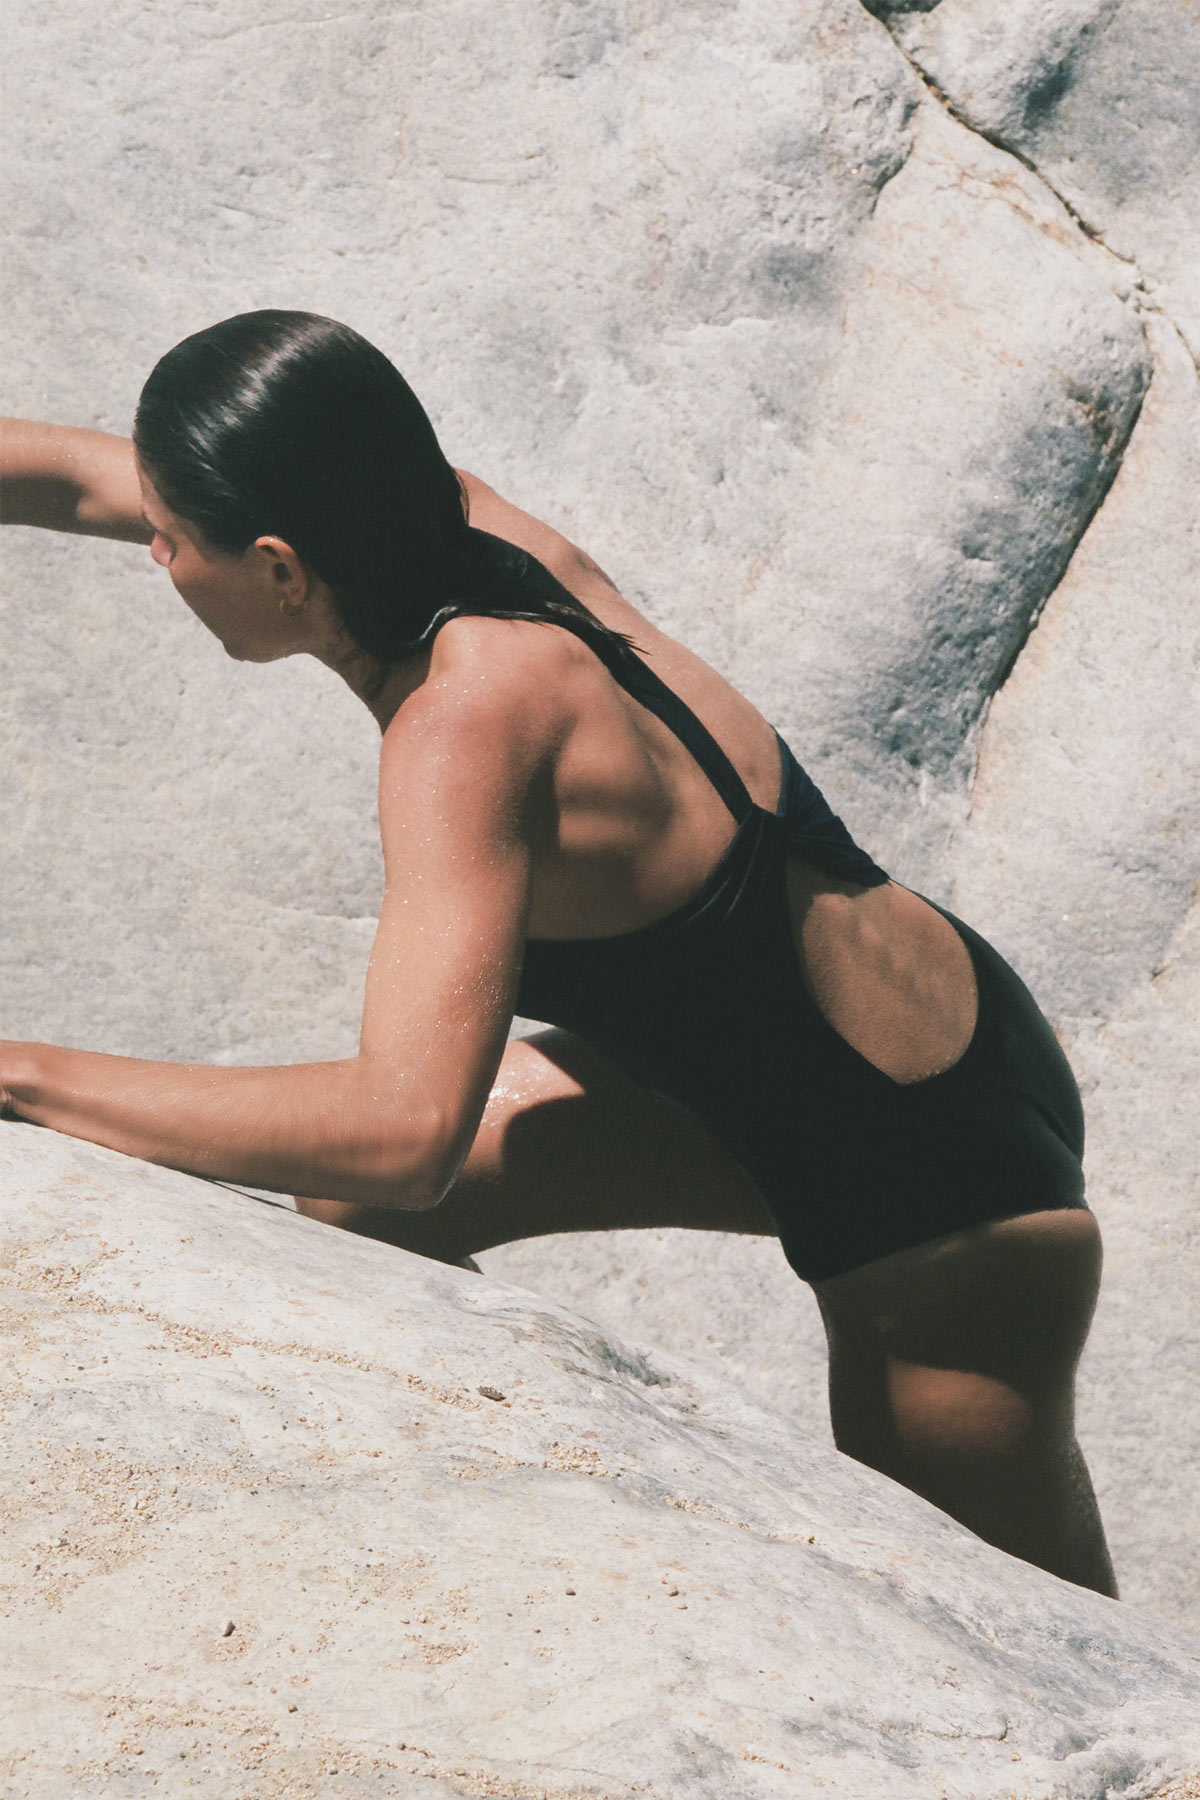 Sustainable swimwear. NOW_THEN is an eco-luxe swim and oceanwear label ethically made for women with an eye on the future.